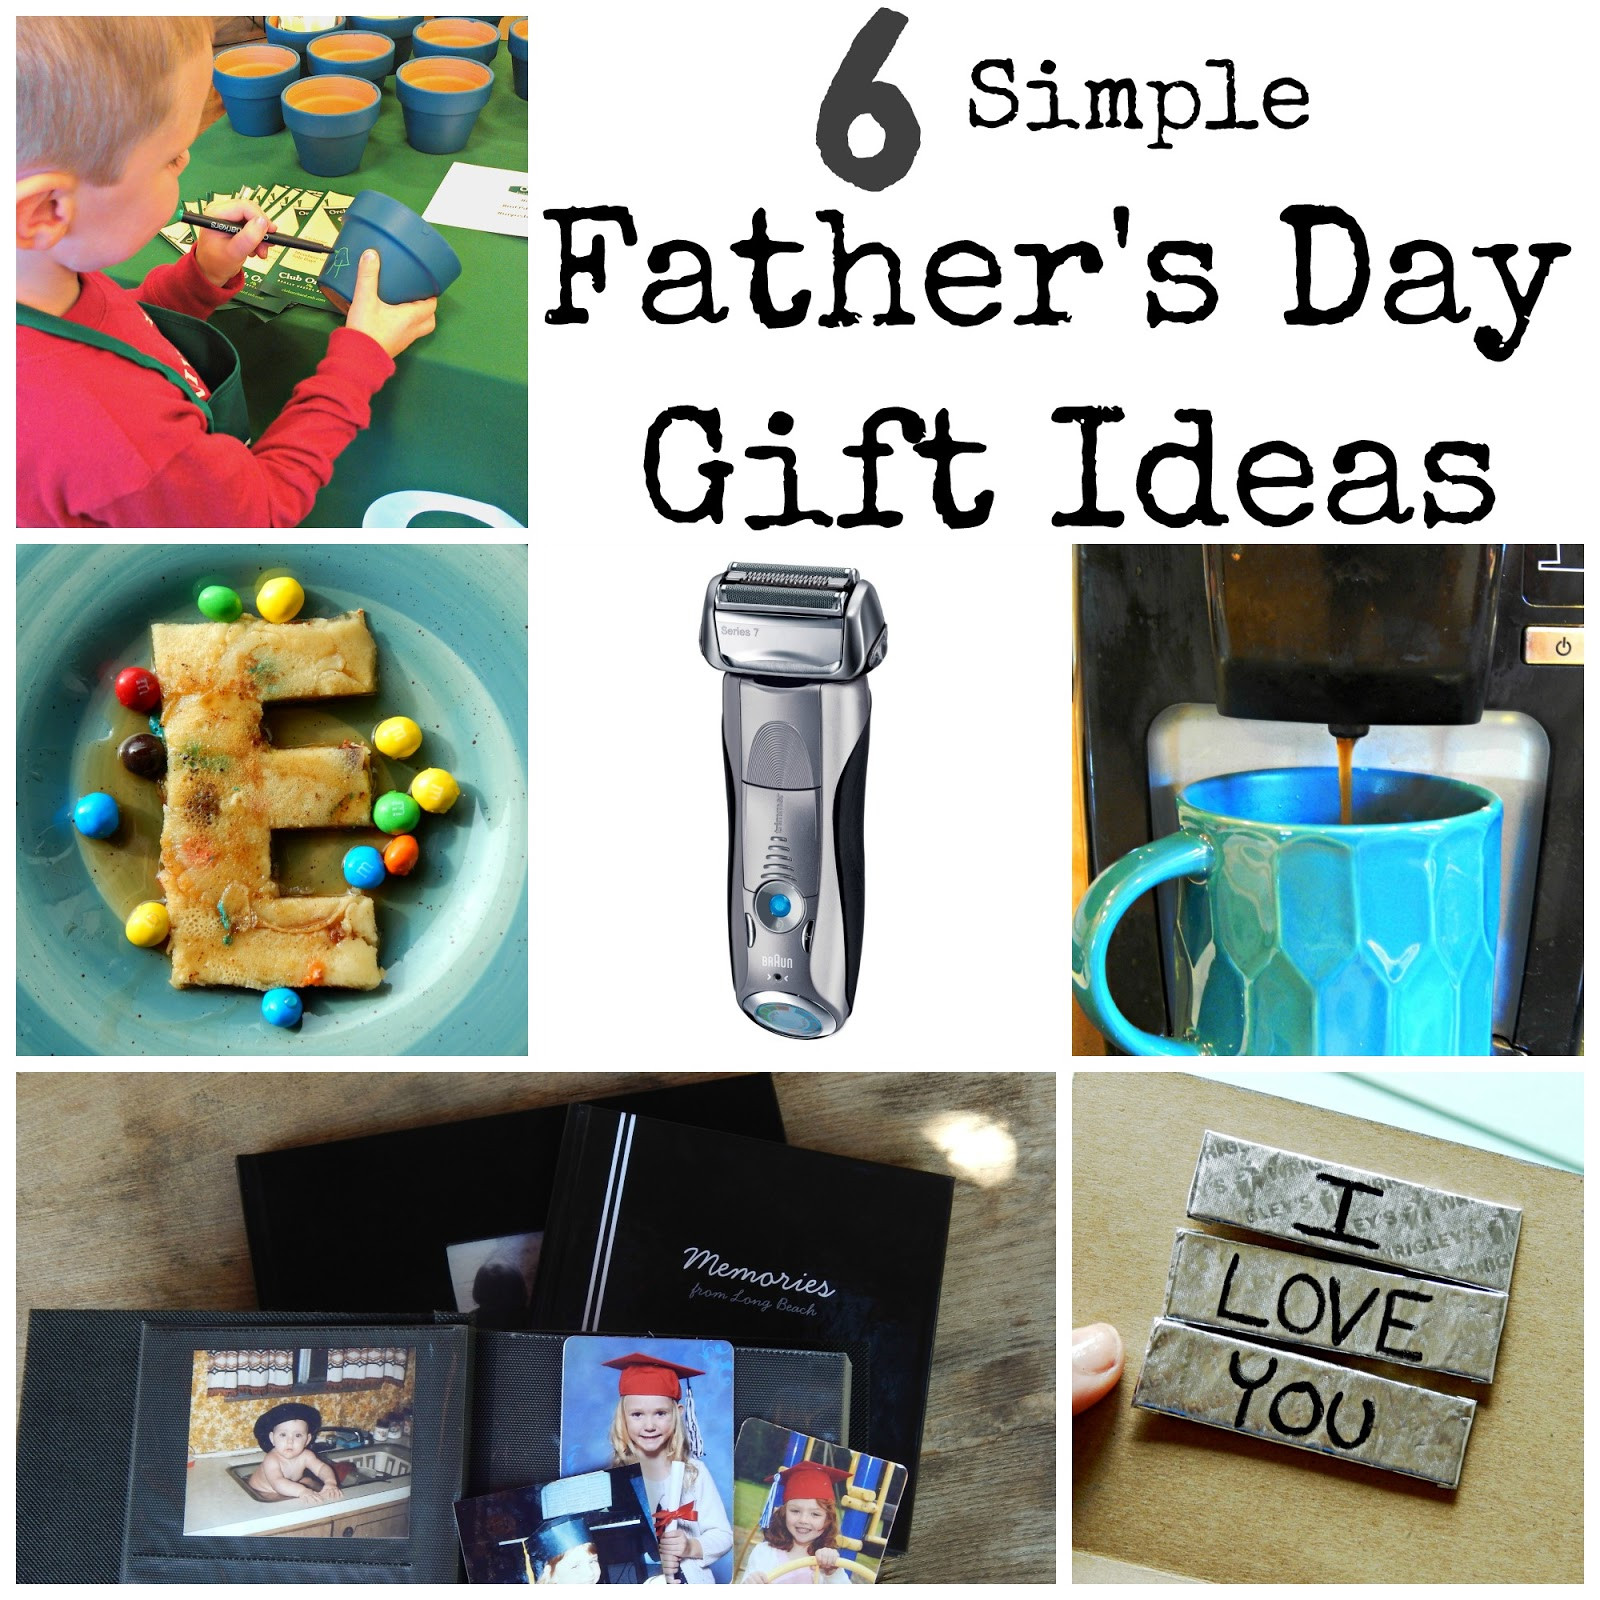 Simple Fathers Day Gift Ideas
 6 Simple Father s Day Gift Ideas Melissa Kaylene